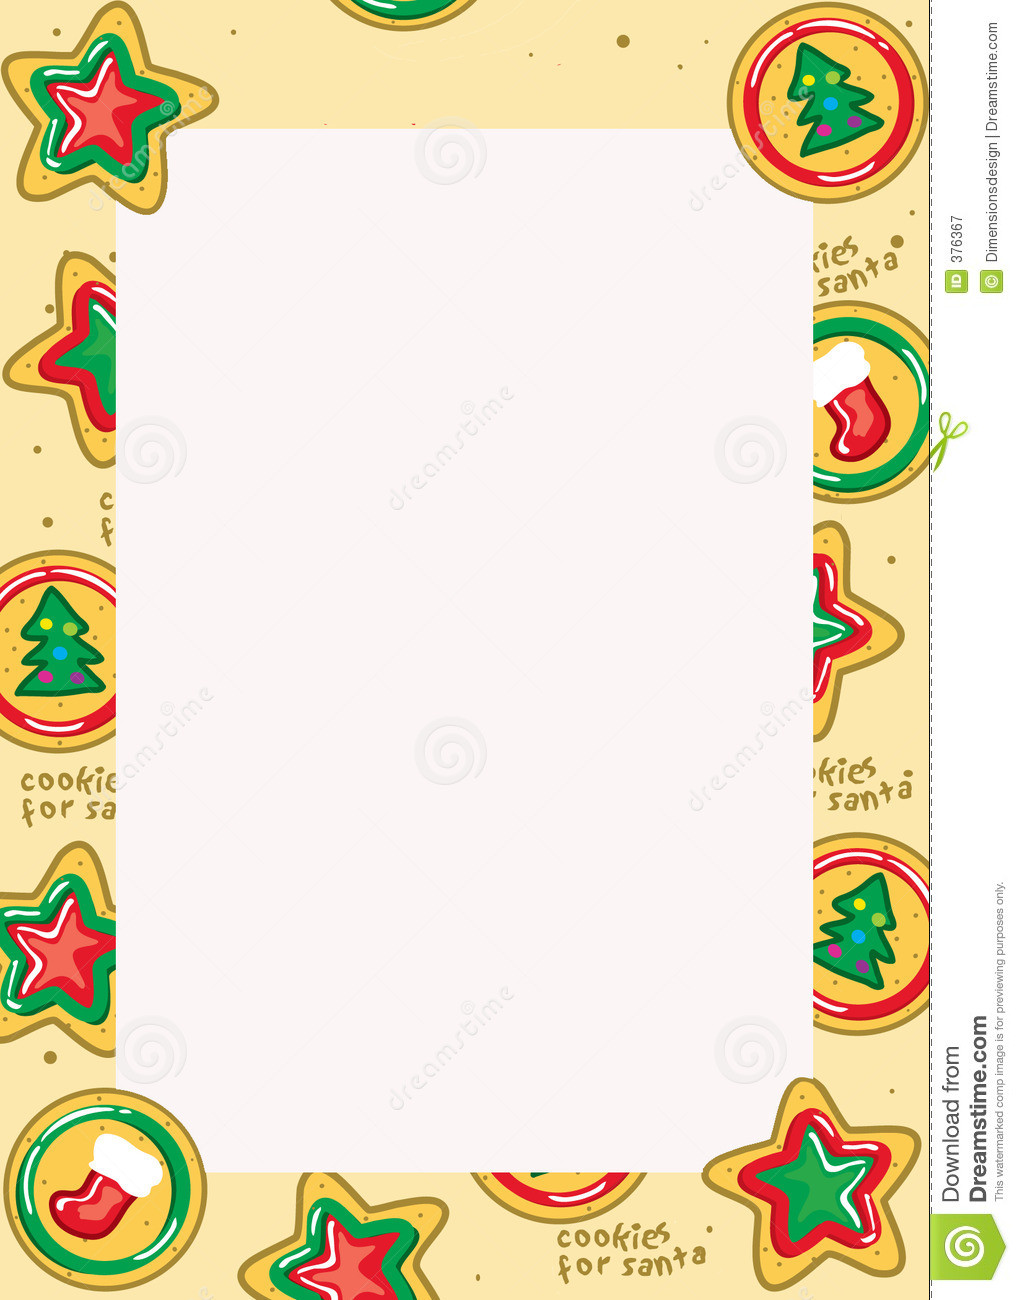 Christmas Cookies Borders
 Best Christmas Cookie Border Clipartion